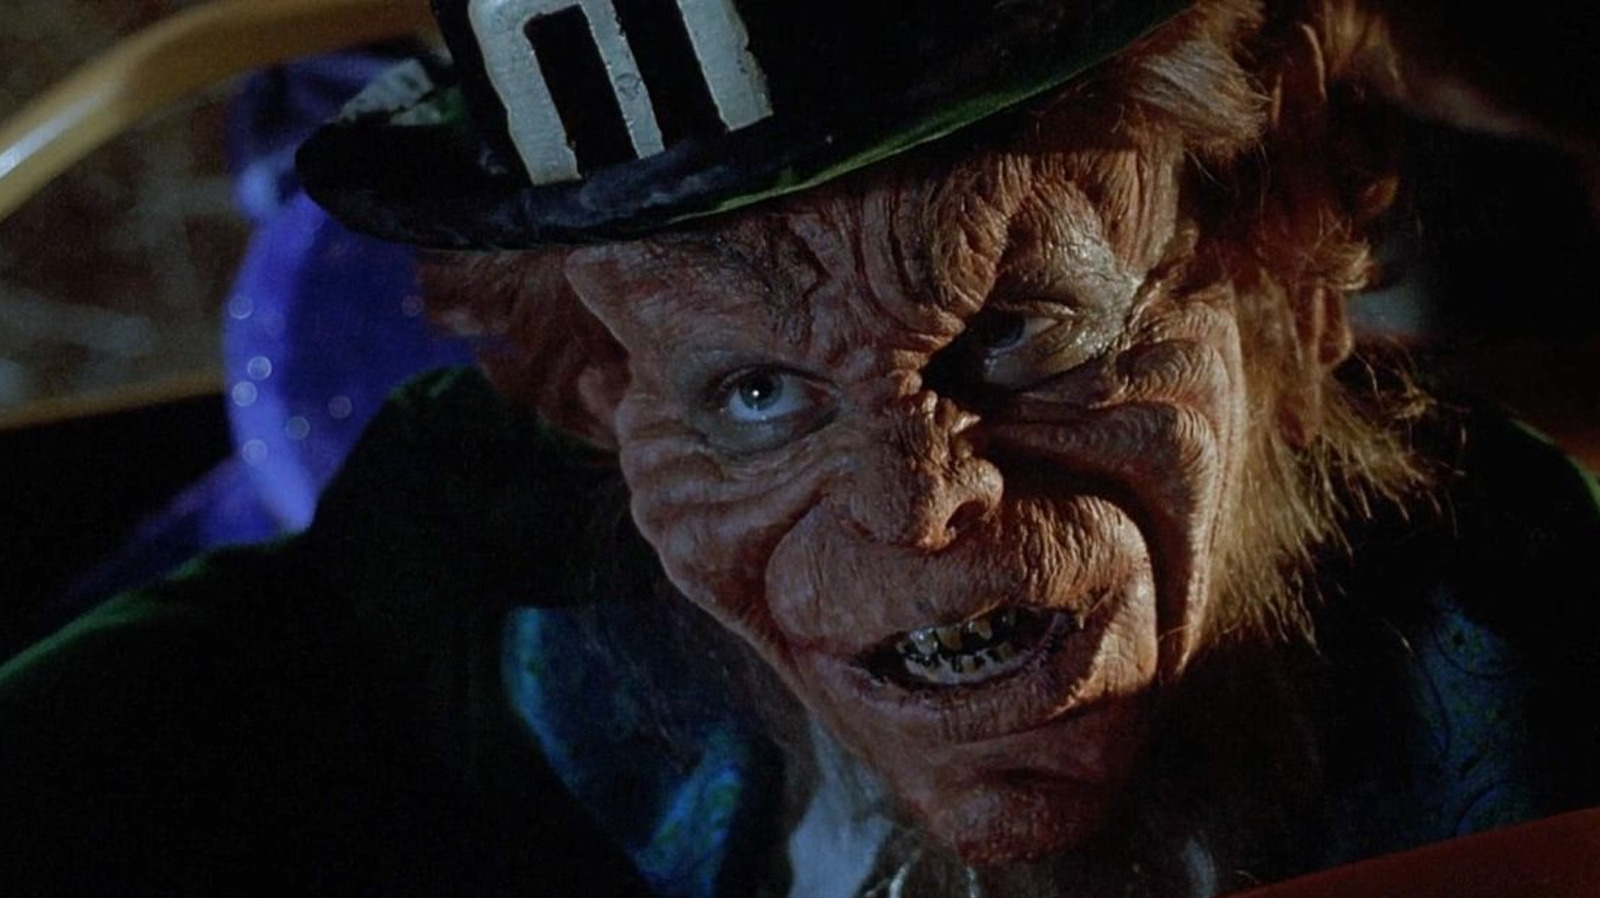 The First Concept For Leprechaun Was 'Much More Horrific'